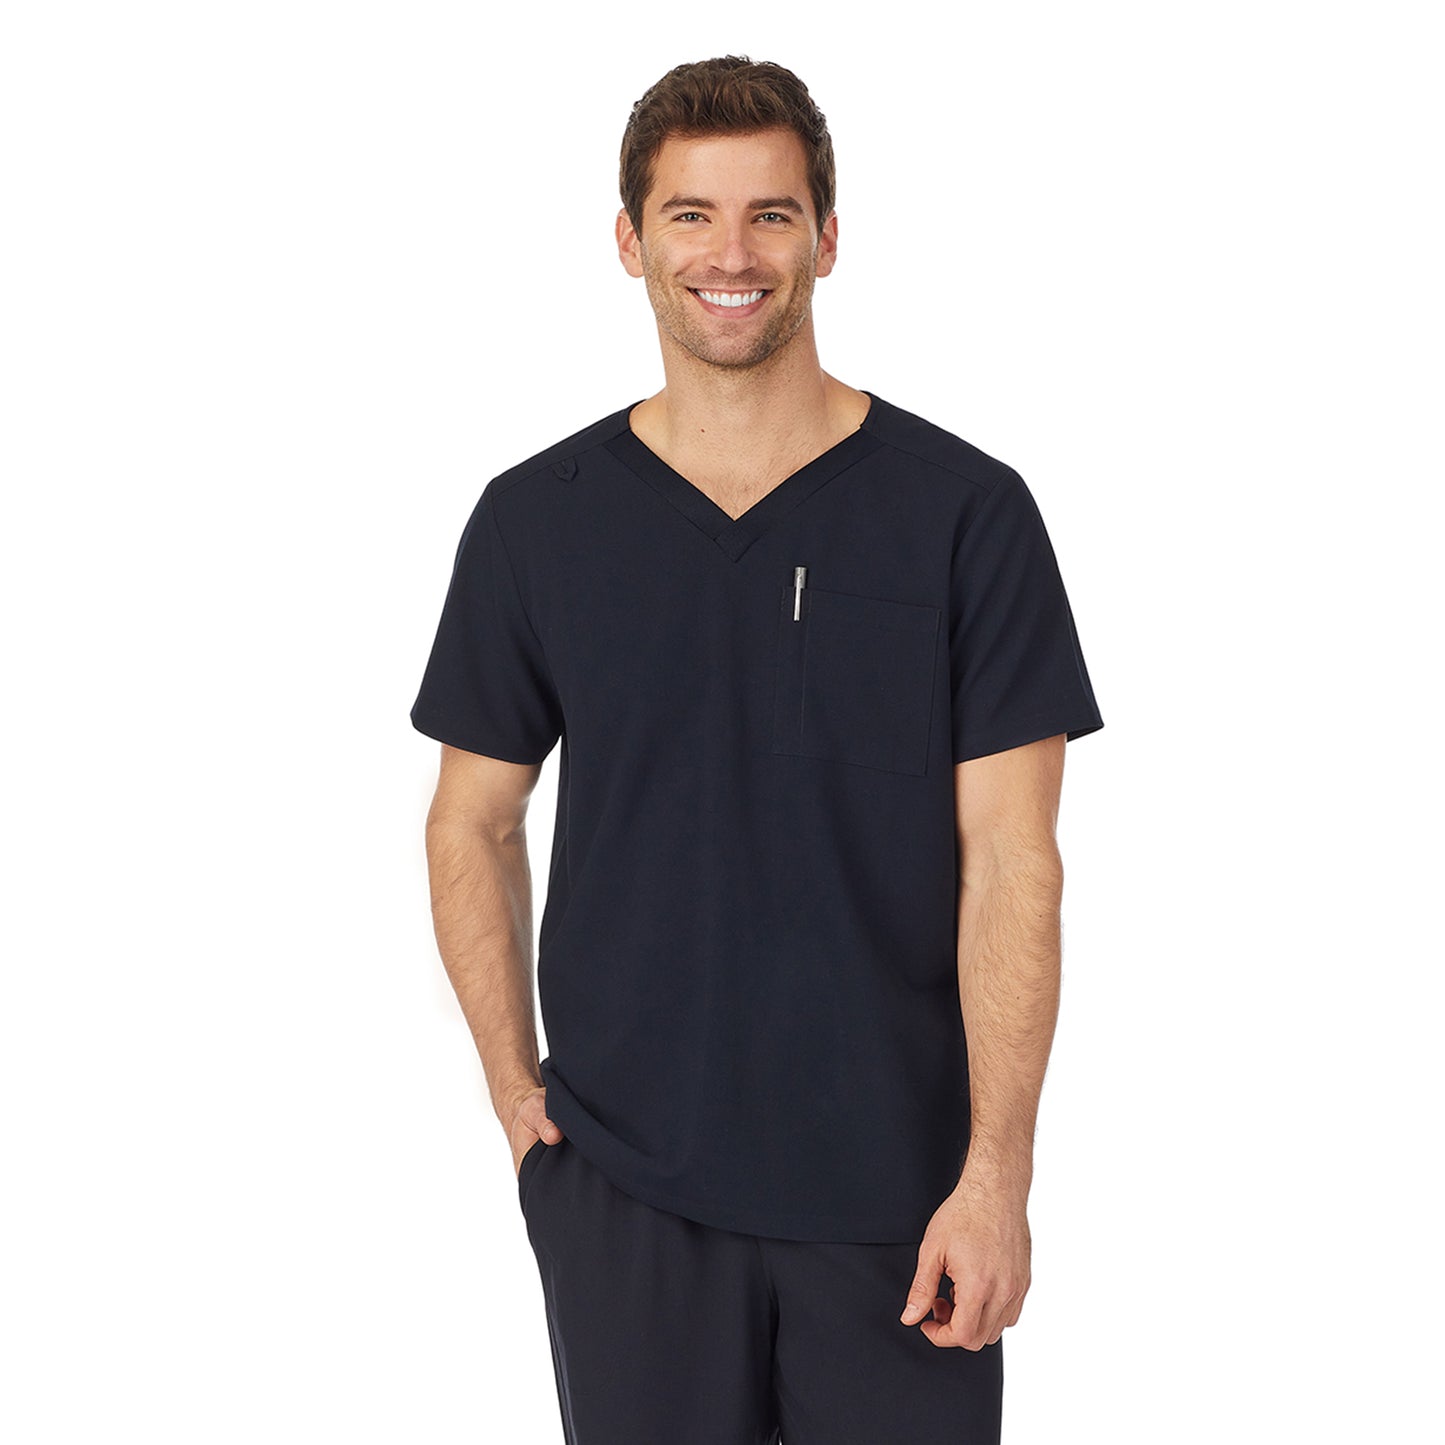 Black;Model is wearing size M. He is 6'2", Waist 32", Inseam 32".@A man wearing black mens scrub v-neck top with chest pocket.